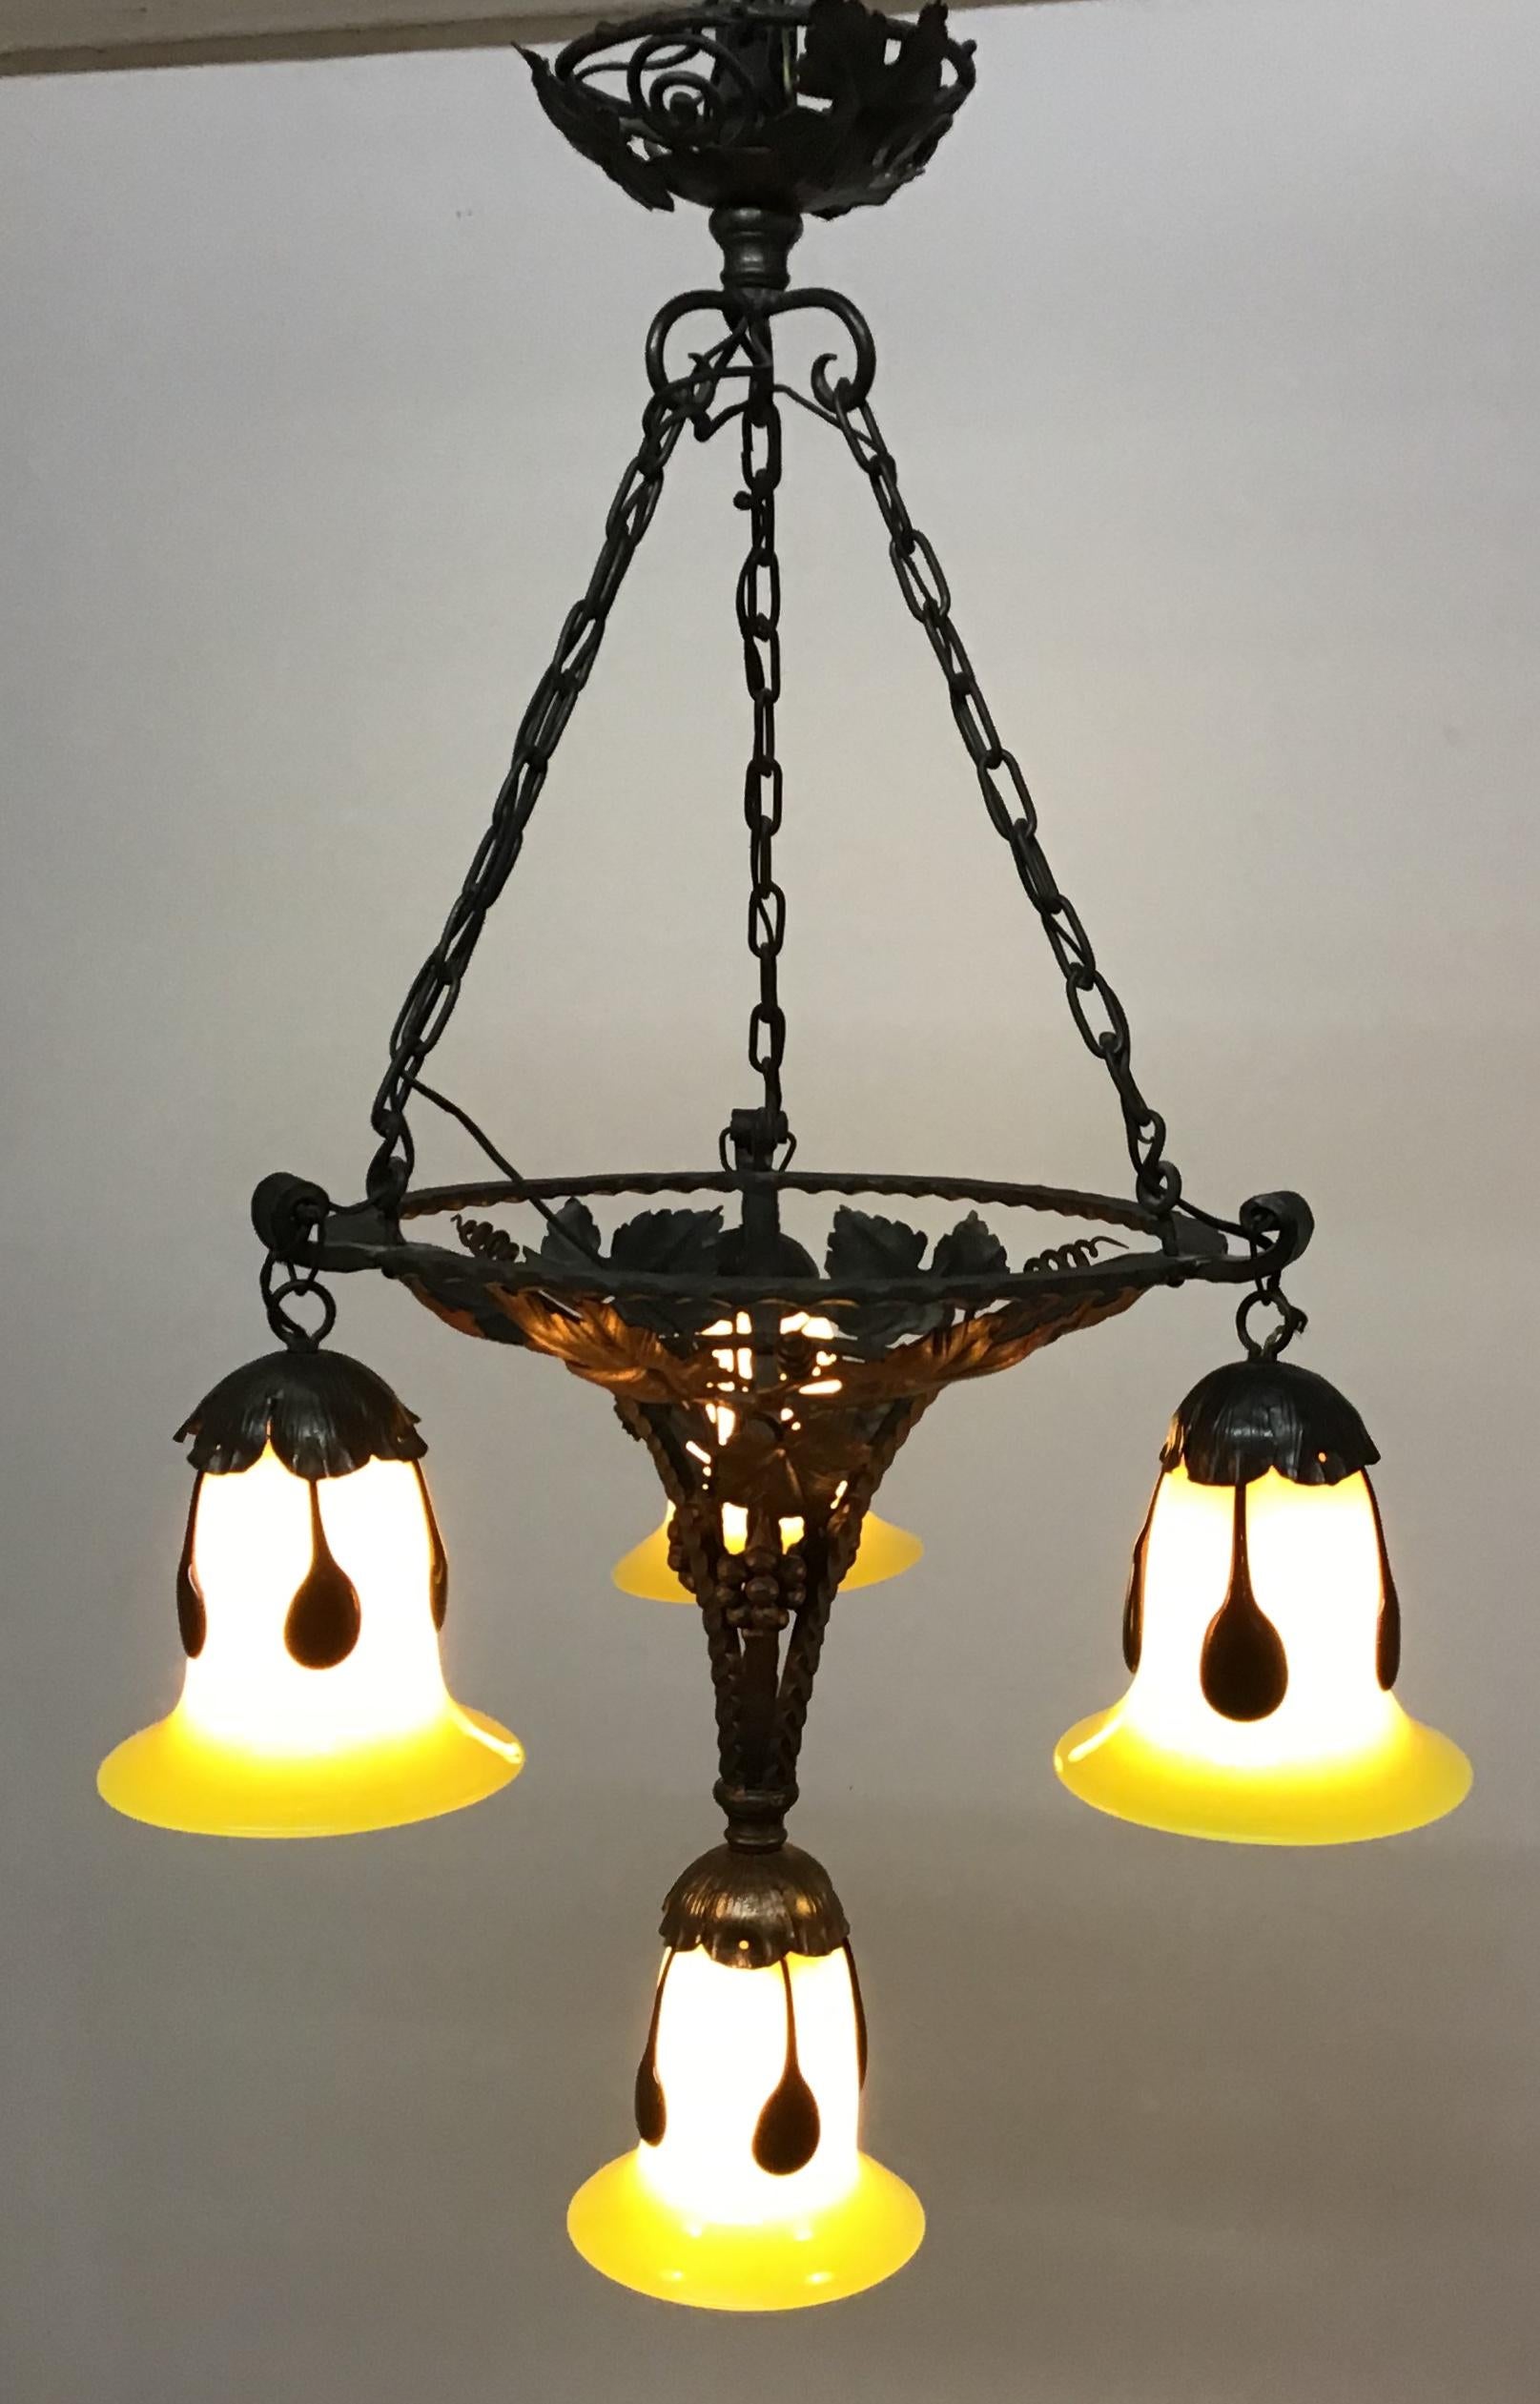 Early 20th Century French Art Deco Chandelier with Loetz Glass, circa 1920s